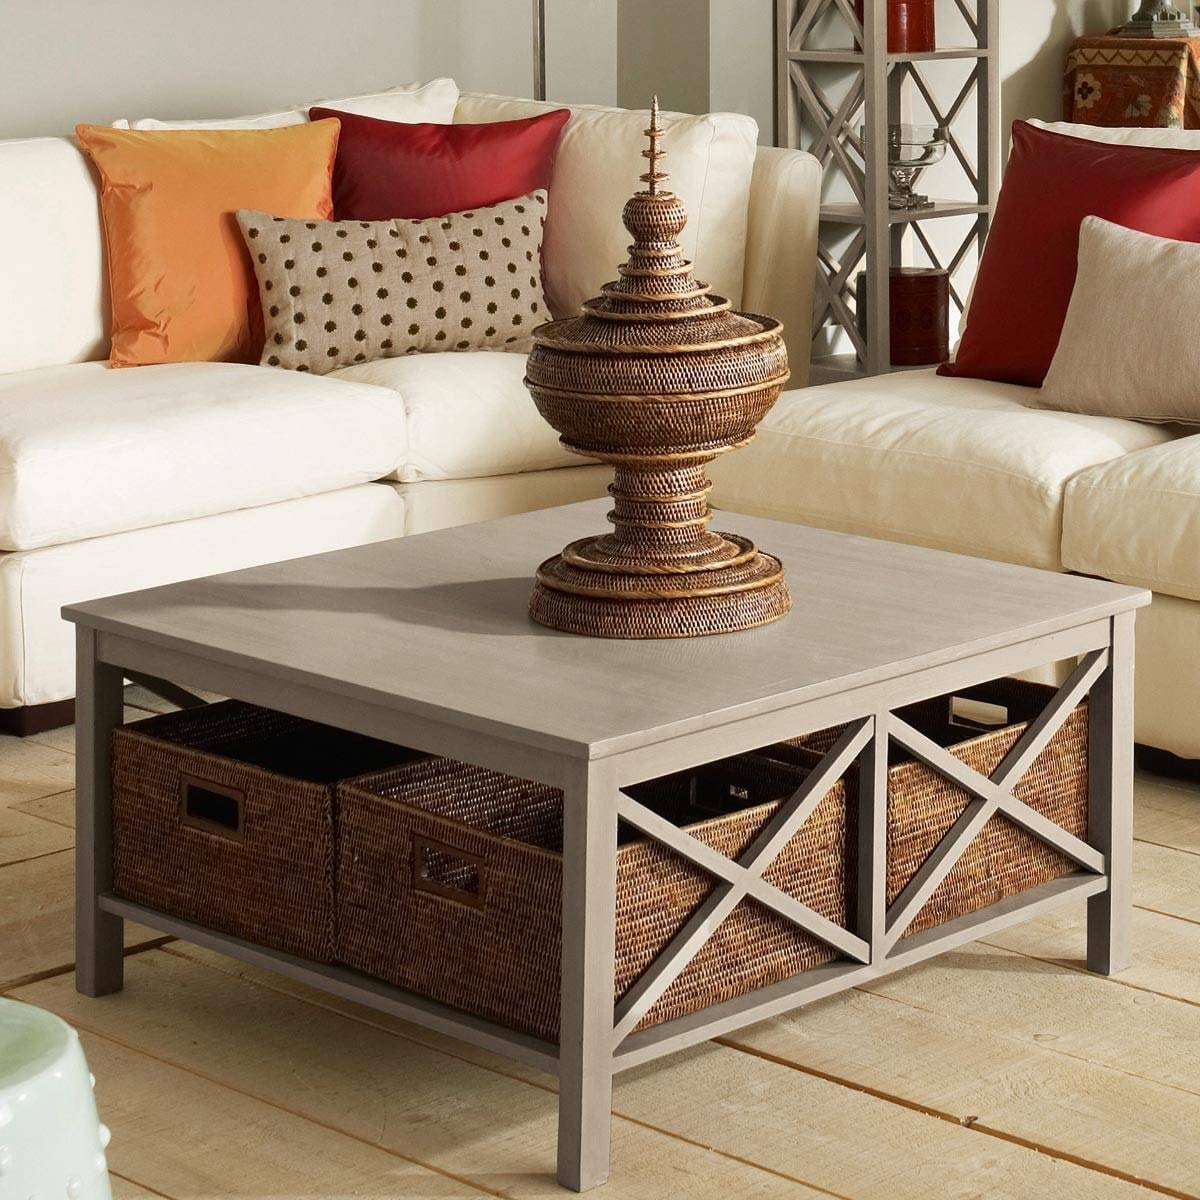 Extra Large Square Coffee Table With Storage : Large square walnut ...